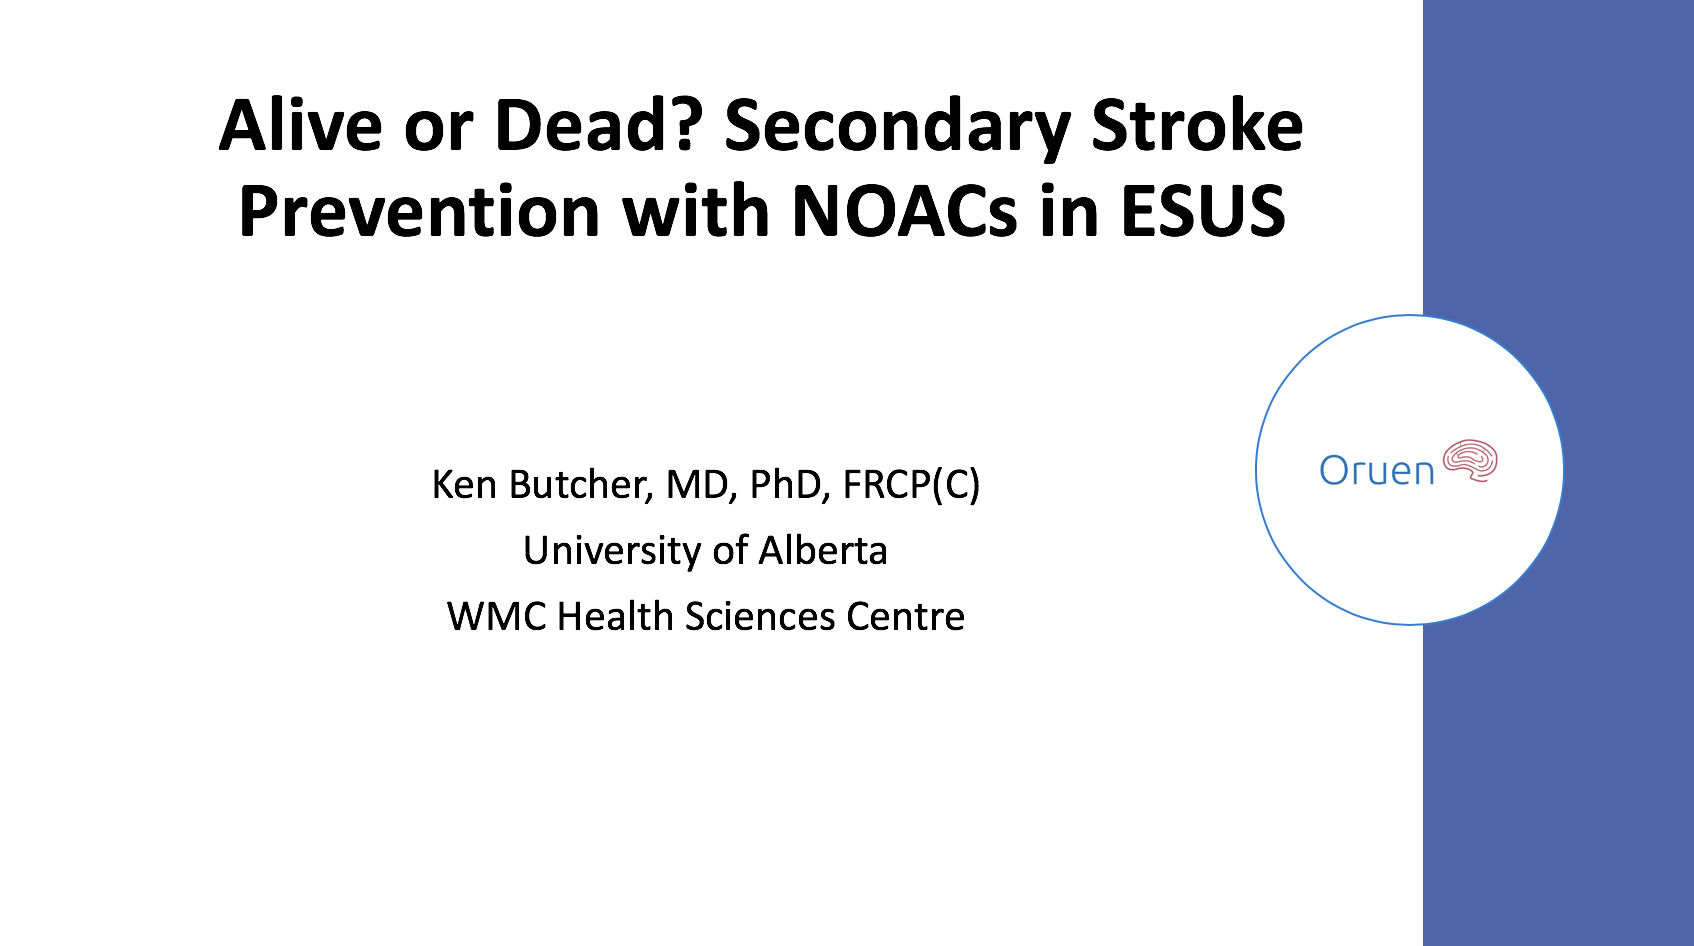 Alive or Dead? Secondary Stroke Prevention with NOACs in ESUS – Ken Butcher